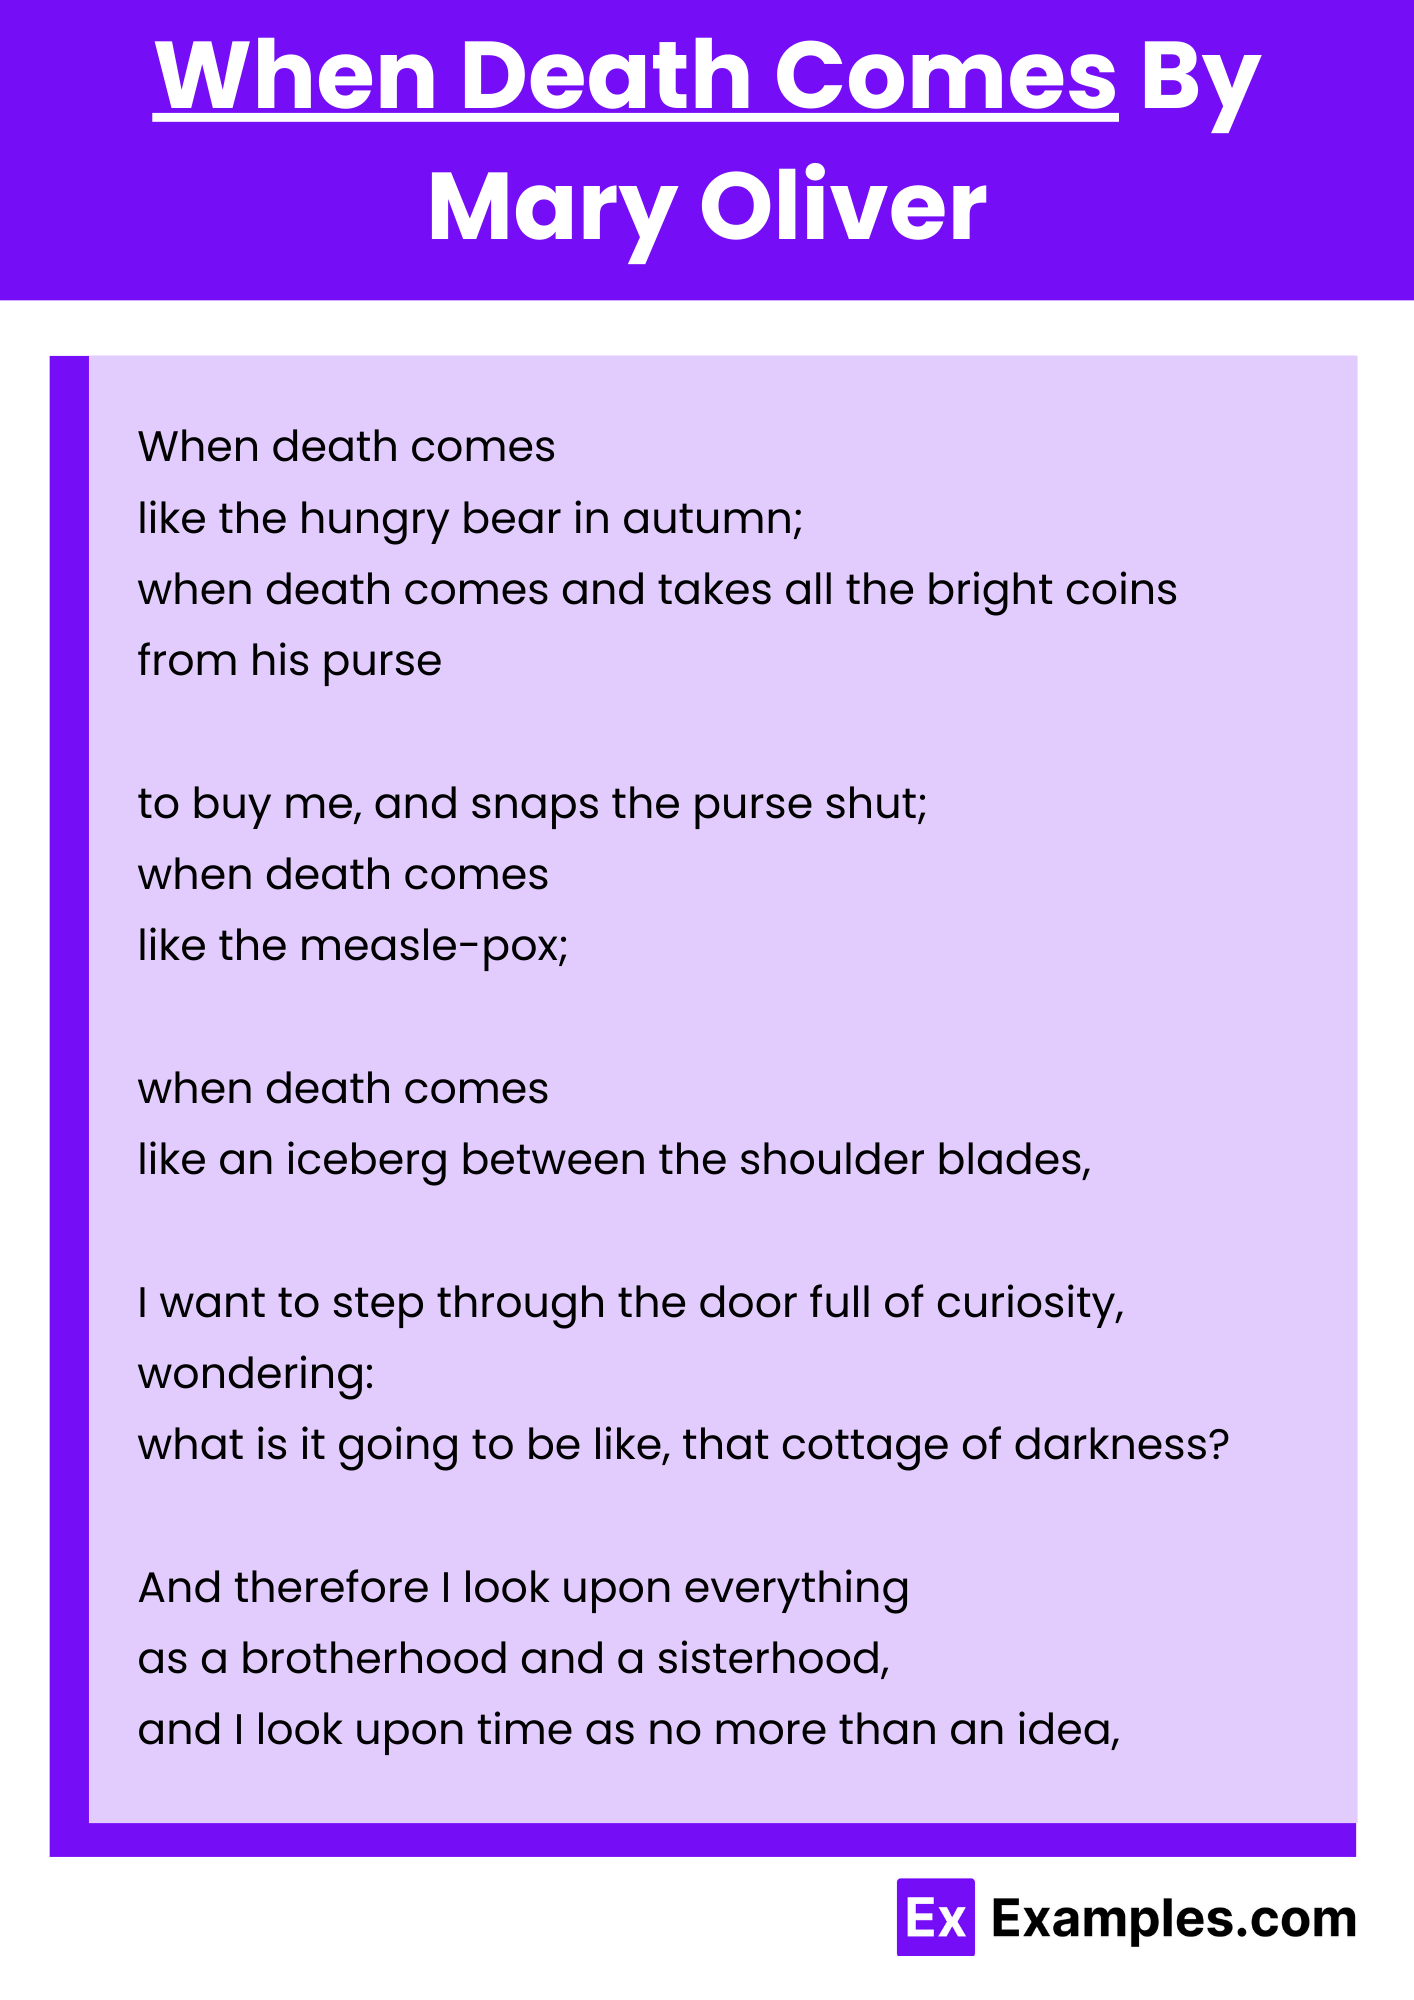 When Death Comes By Mary Oliver